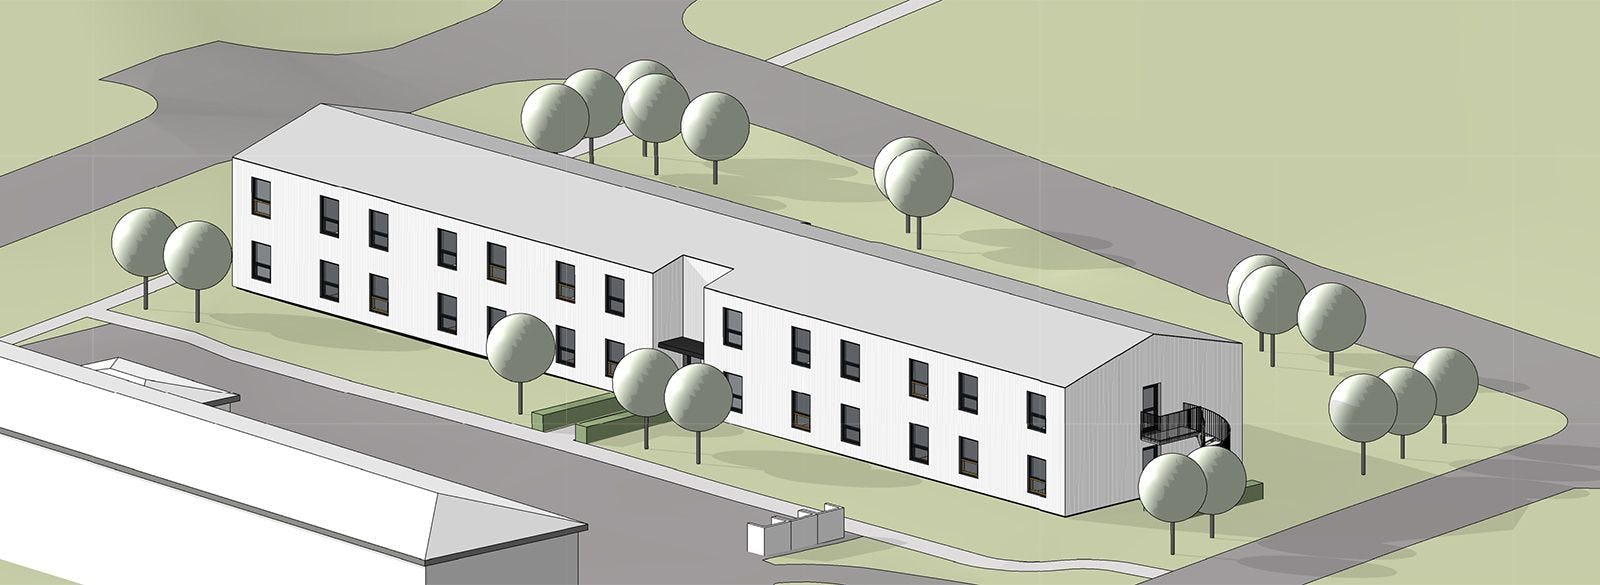 3D model of a building complex with minimalistic design